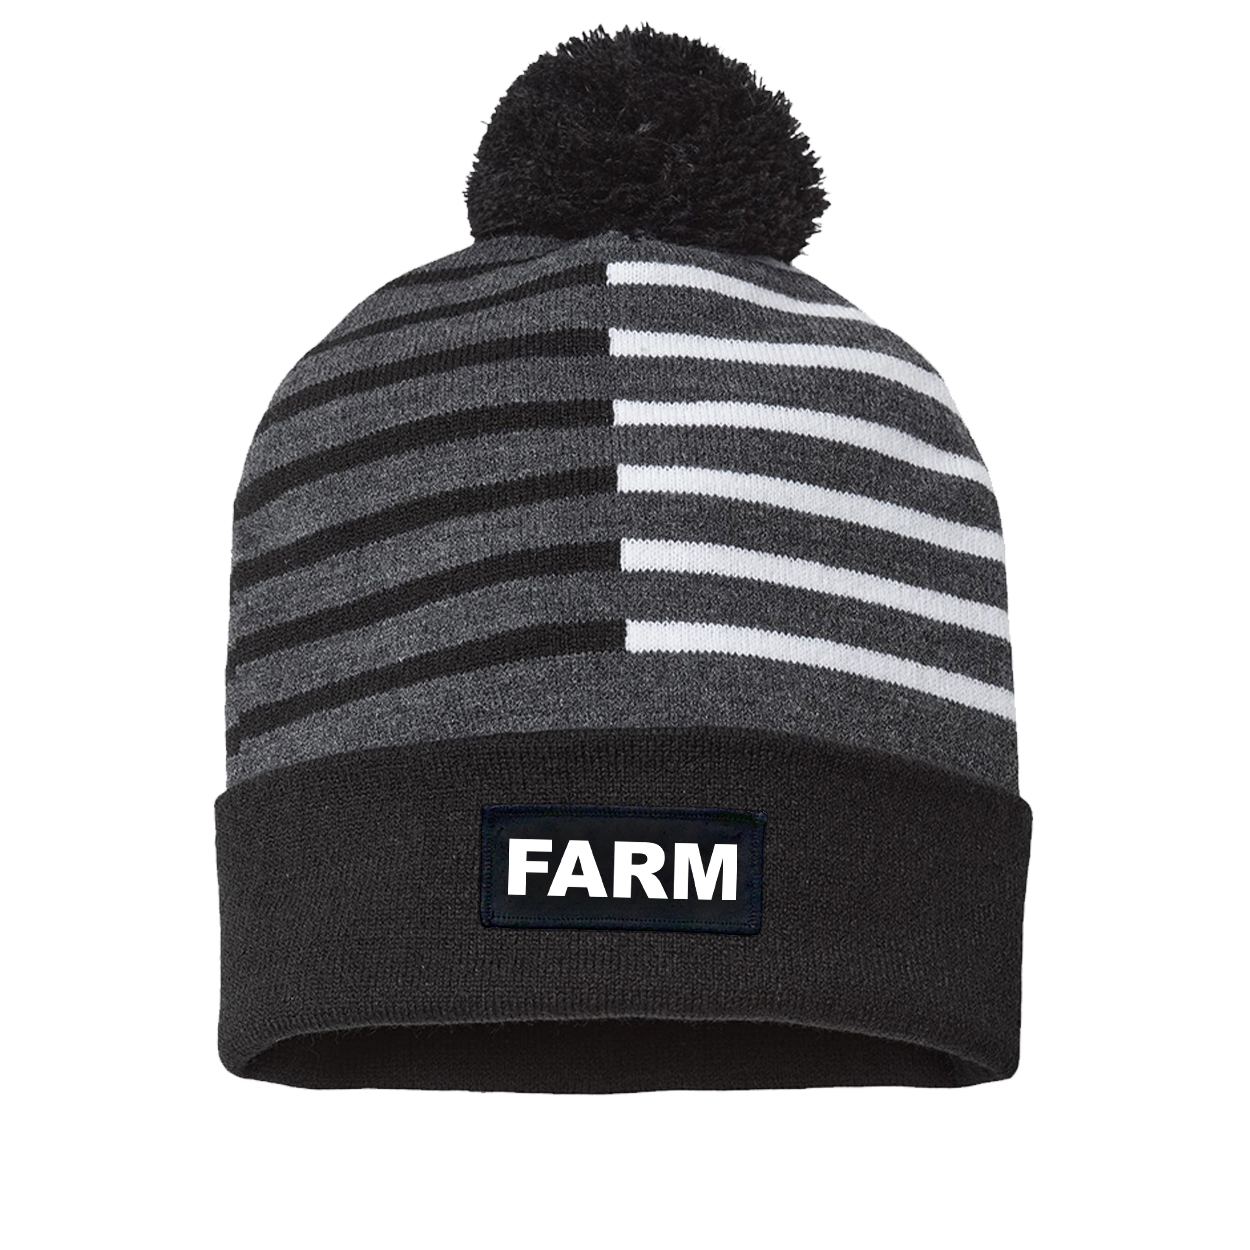 Farm Brand Logo Night Out Woven Patch Roll Up Pom Knit Beanie Half Color Black/White (White Logo)